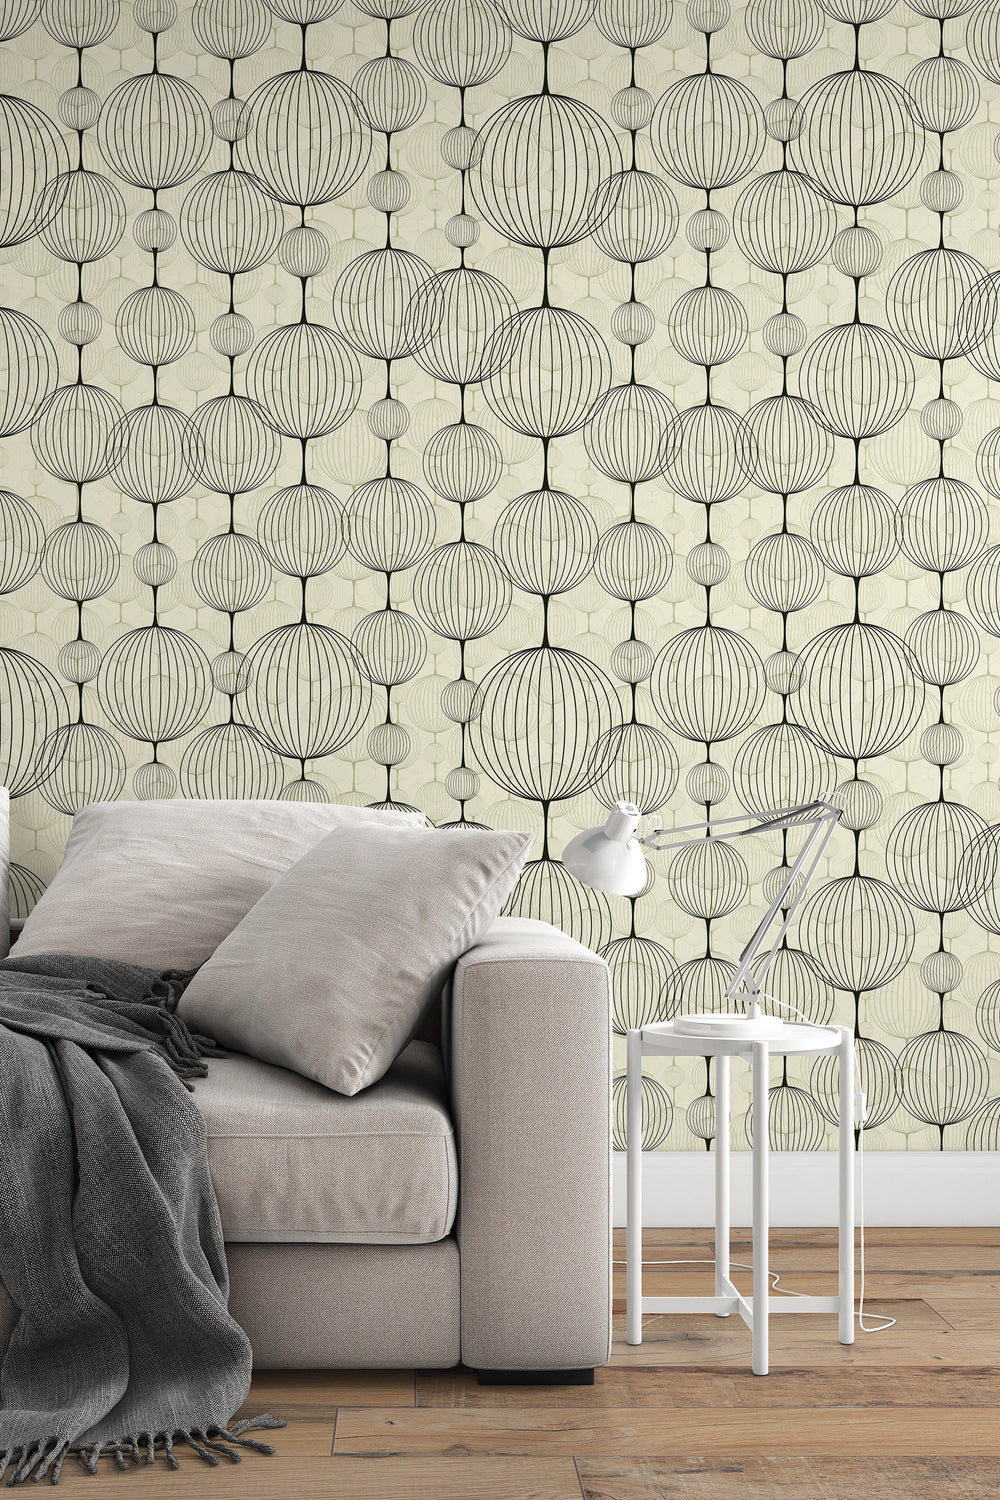 Wallpaper Abstract Balloon - Peel and stick, Removable , traditional wallpaper #53362 /1040